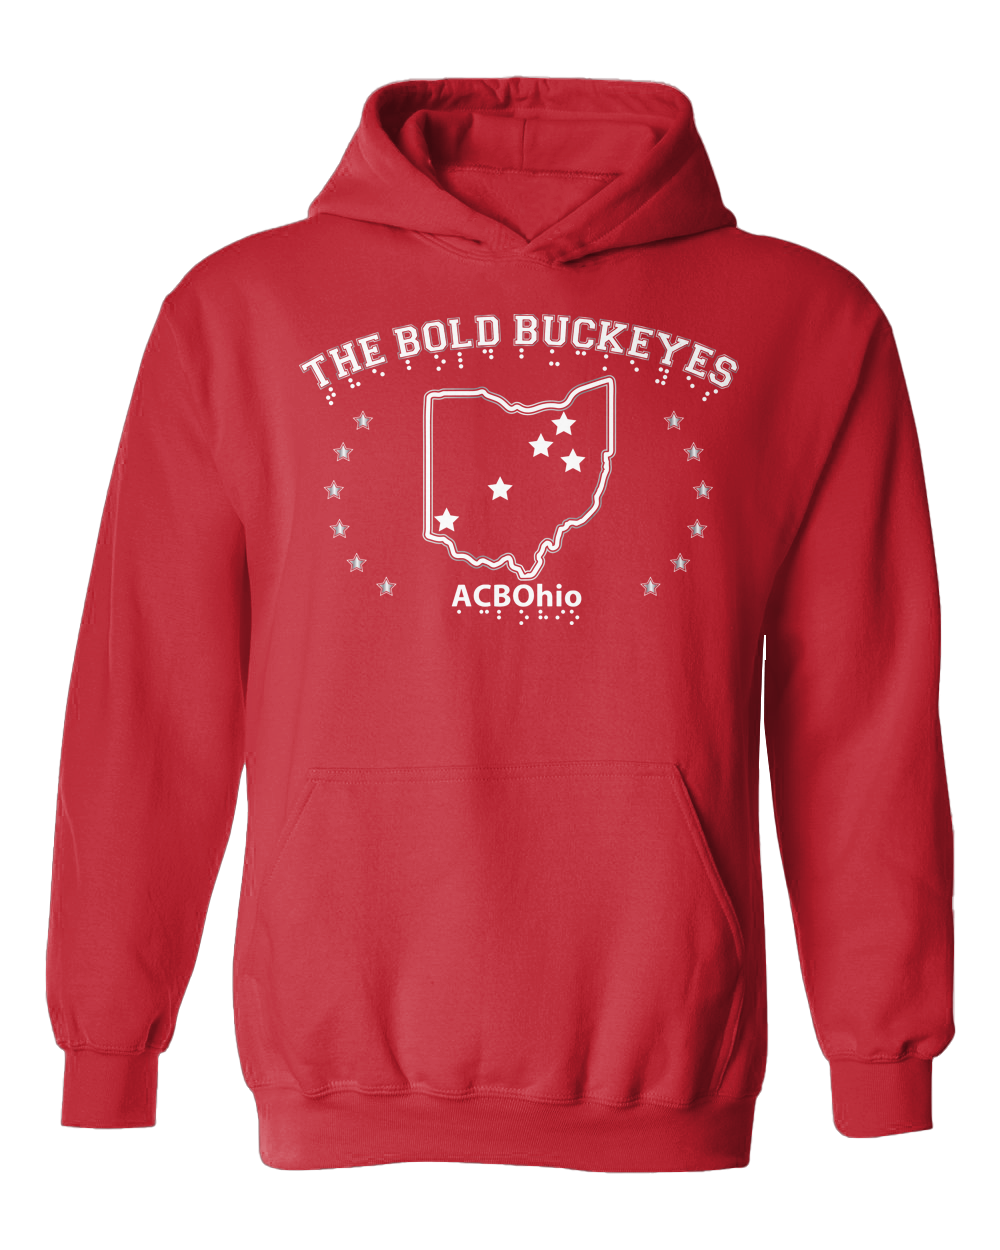 The design on this red hoodie&nbsp;features white tactile puff ink in the outline of the state of Ohio with six stars in a half circle on either side. There are five stars within the state outline marking cities within Ohio. Above the stars and state outline reads THE BOLD BUCKEYES with braille under each letter. Under the state and stars is ACB OHIO with braille under each letter.